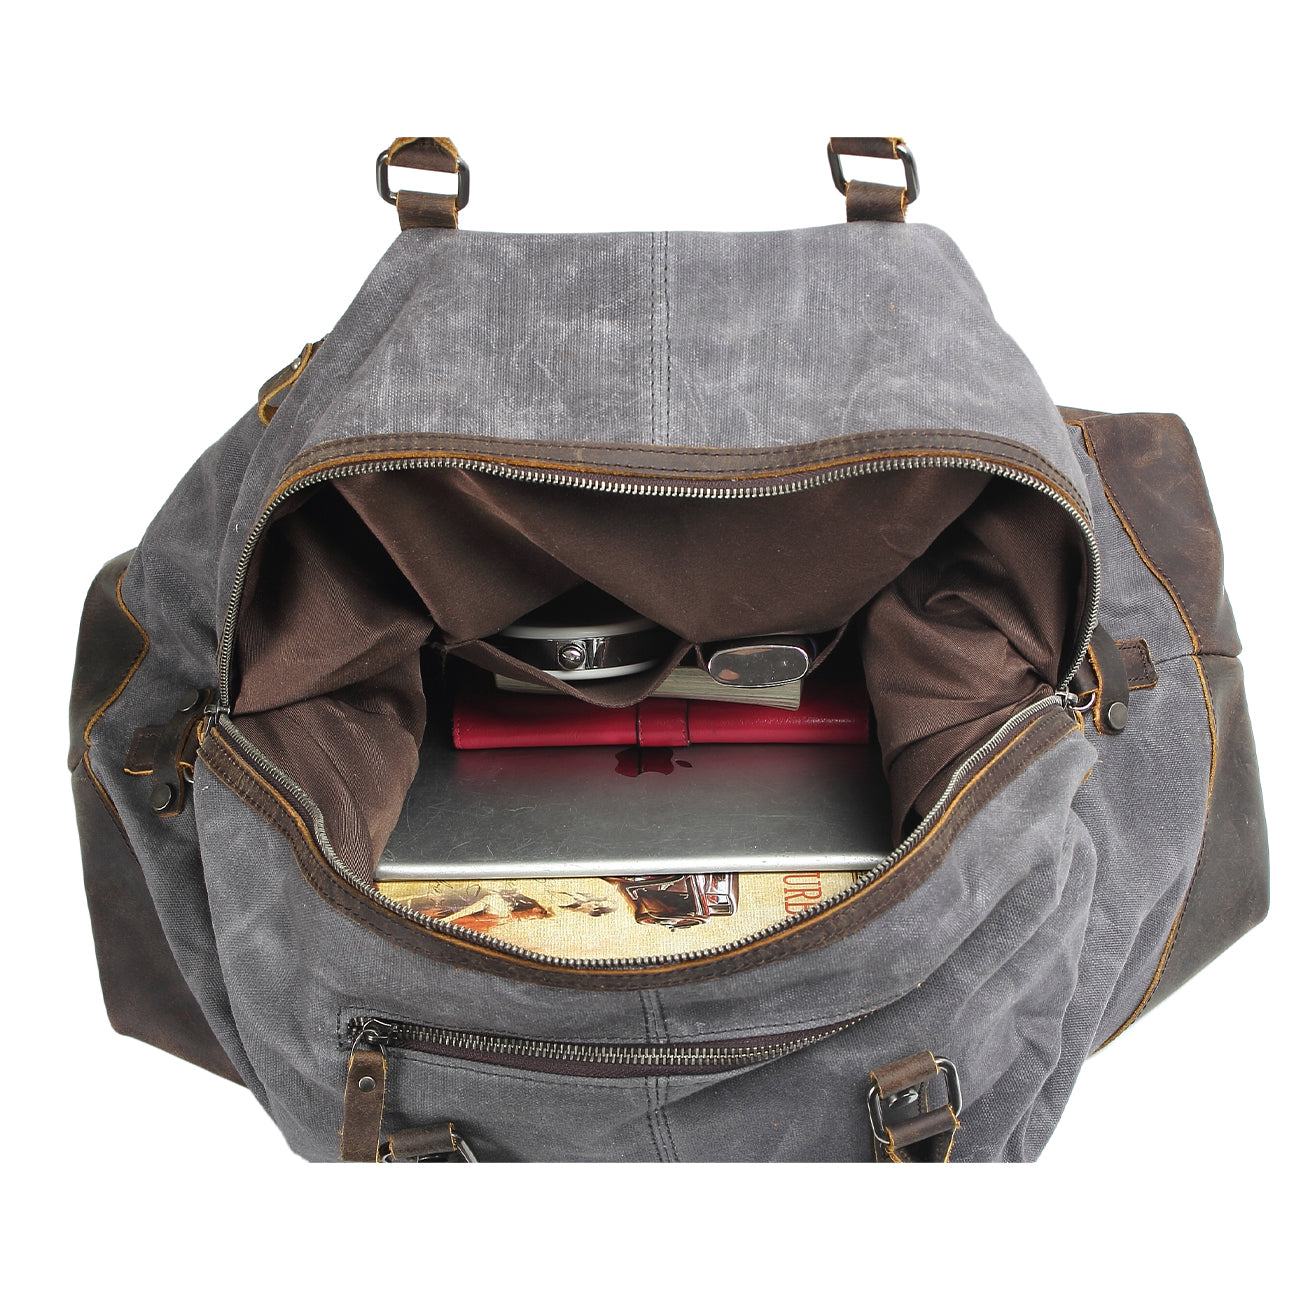 duffle waterproof bag with detachable shoulder strap and exterior pockets